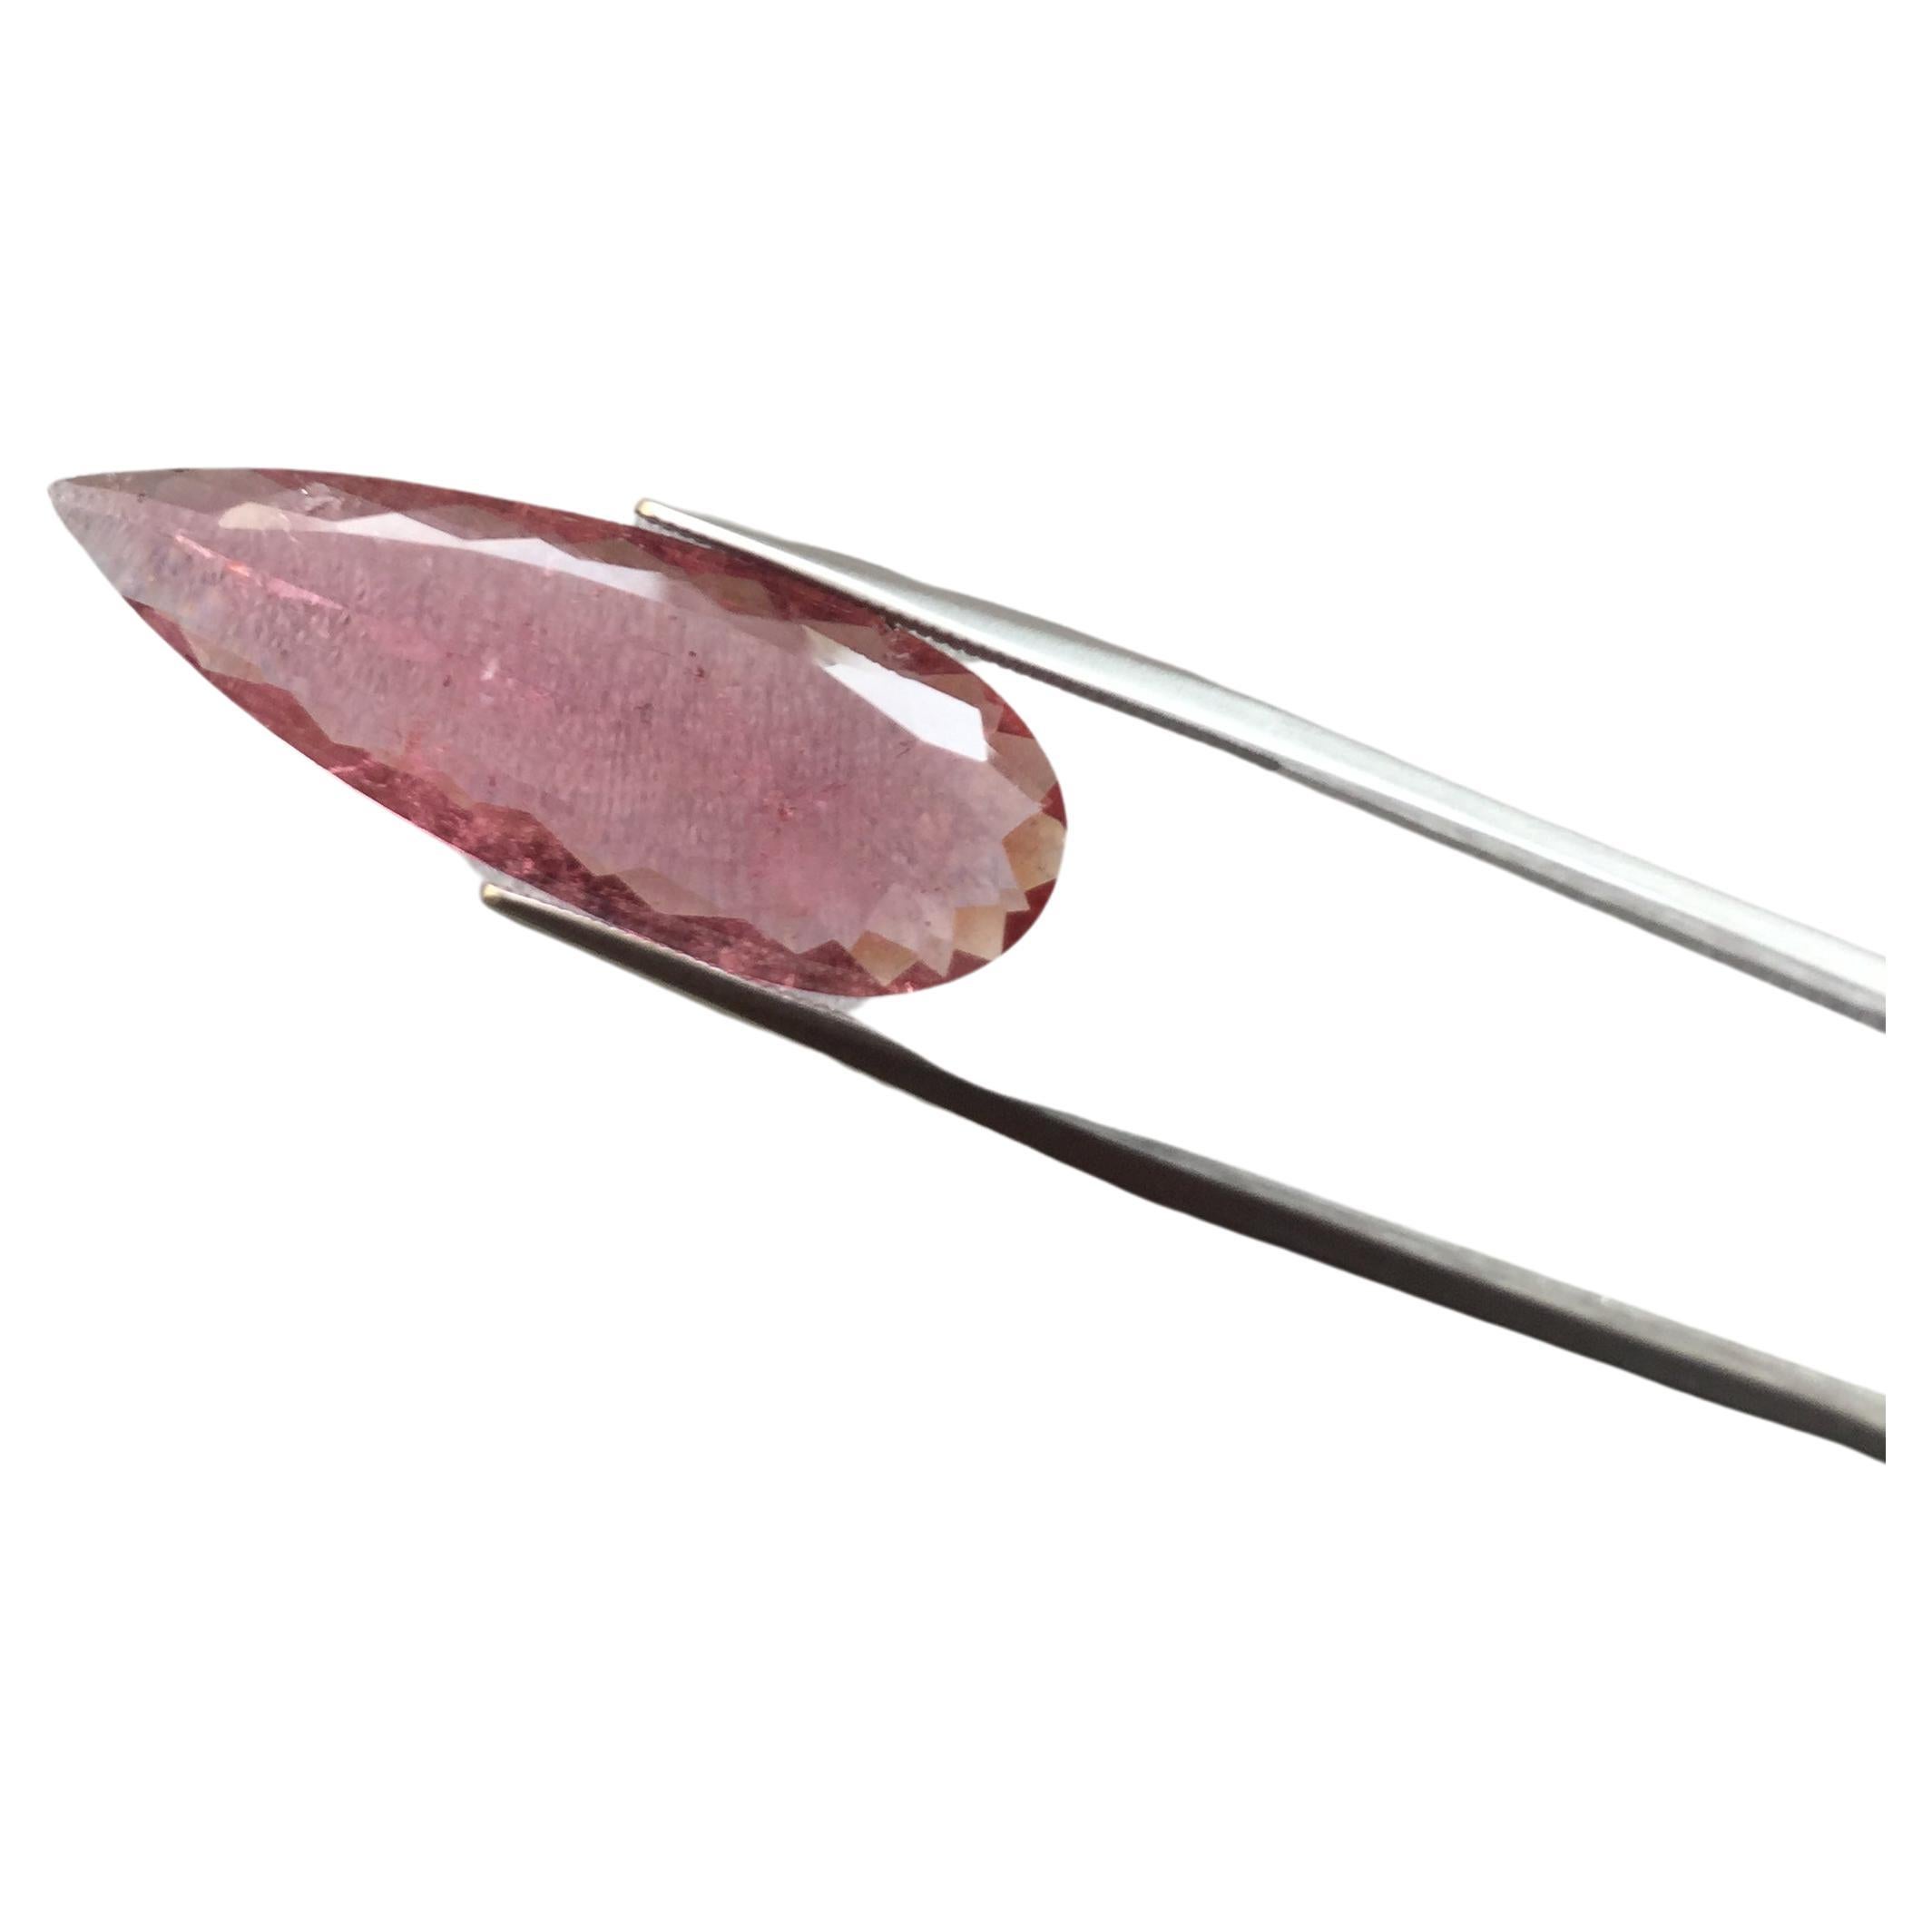 8.79 Carat Pink Tourmaline Pear Cut for High Jewelry For Sale